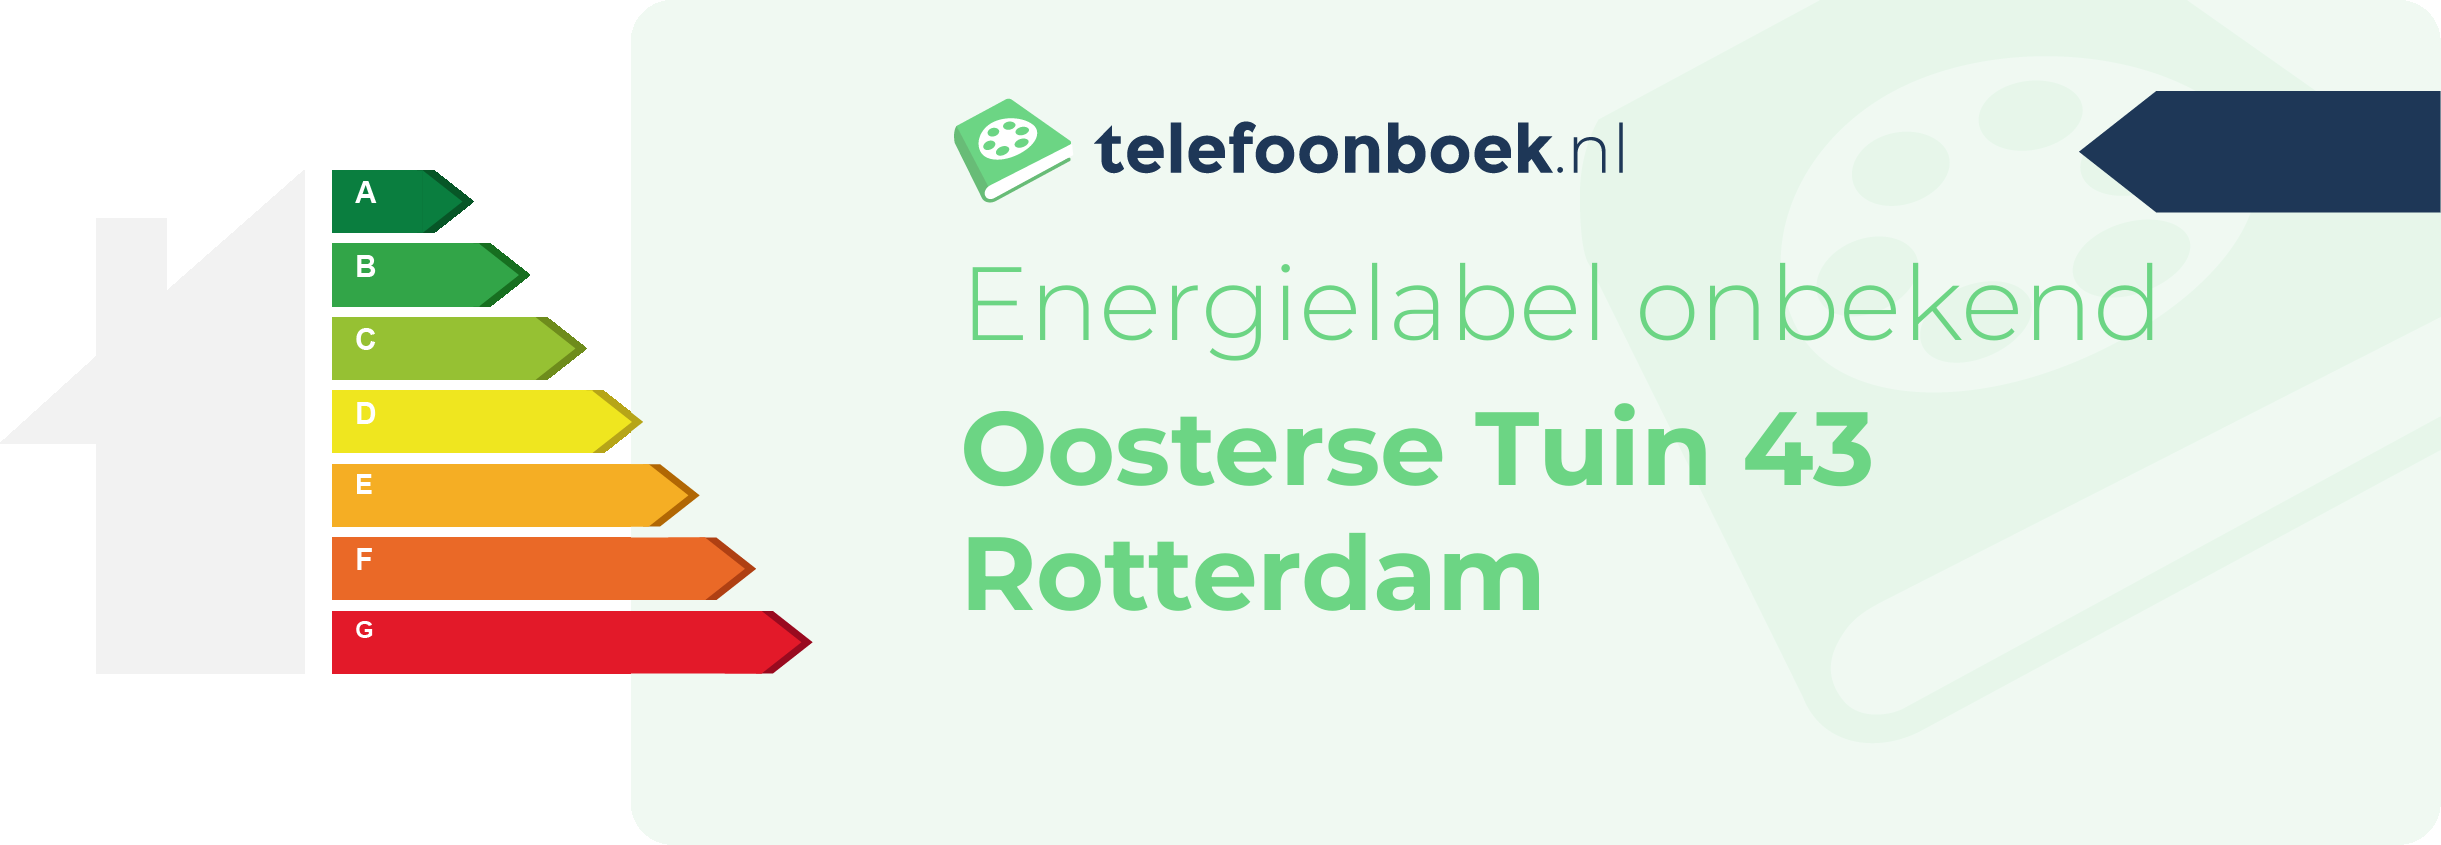 Energielabel Oosterse Tuin 43 Rotterdam